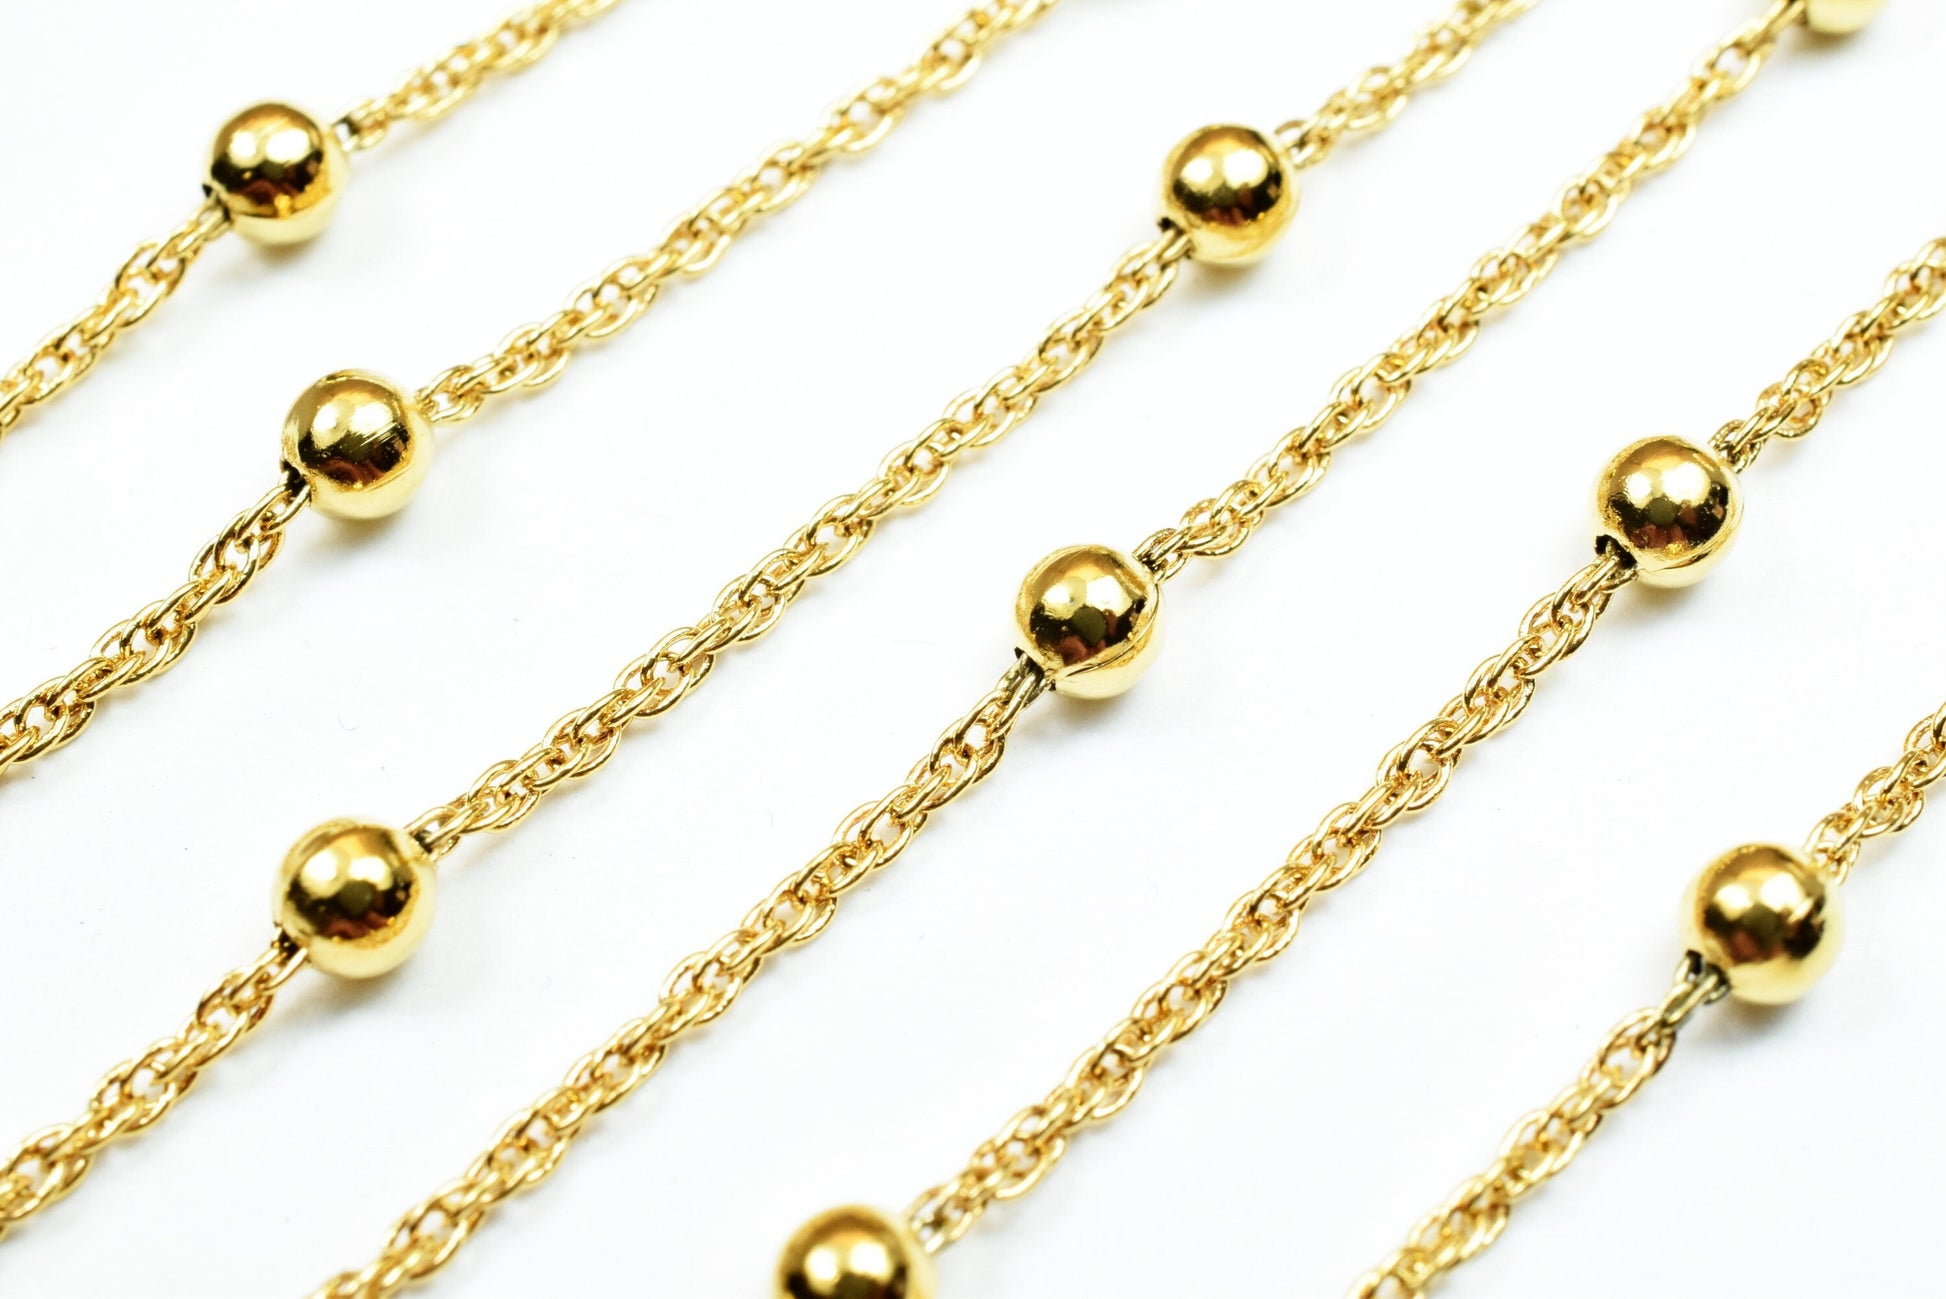 Gold Plated* satellite chain 18k ball size 3.5mm chain size 1mm for jewelry making gfc51 sold by foo